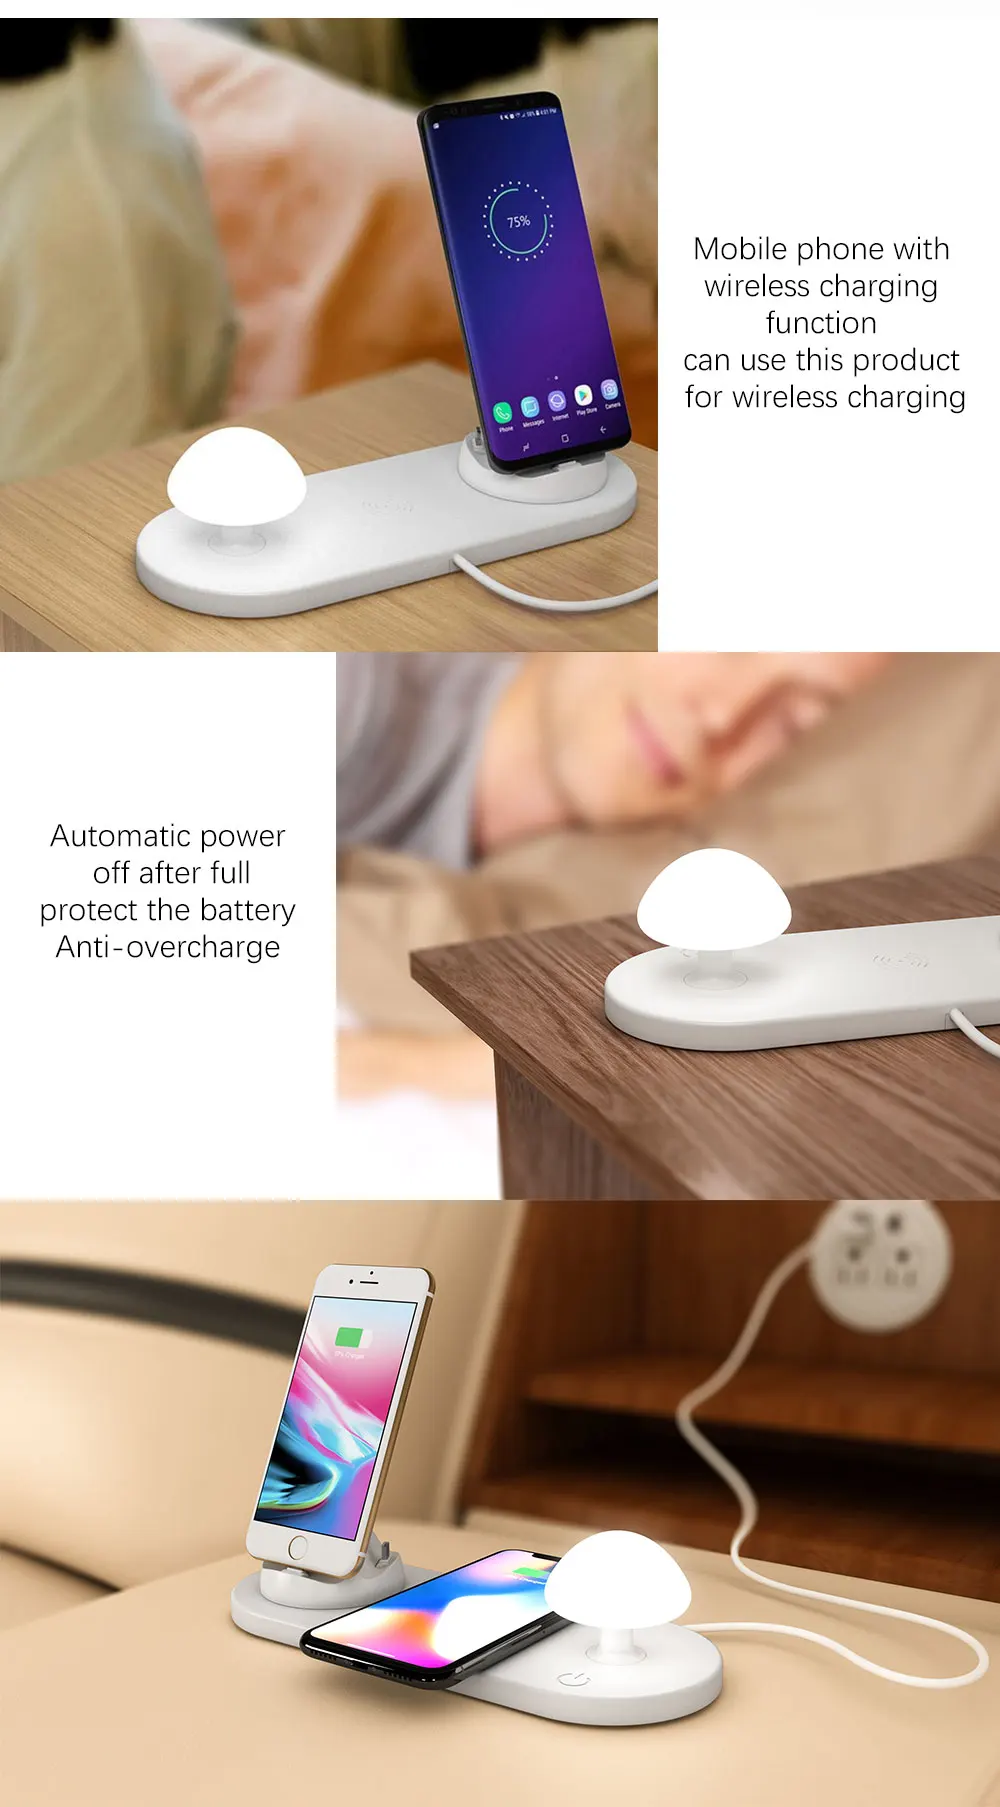 Ascromy-3-IN-1-Wireless-Charging-Dock-Station-For-iPhone-Xs-Max-X-8-Plus-Micro-USB-Android-Type-C-Phone-Charger-Mushroom-Light (3)